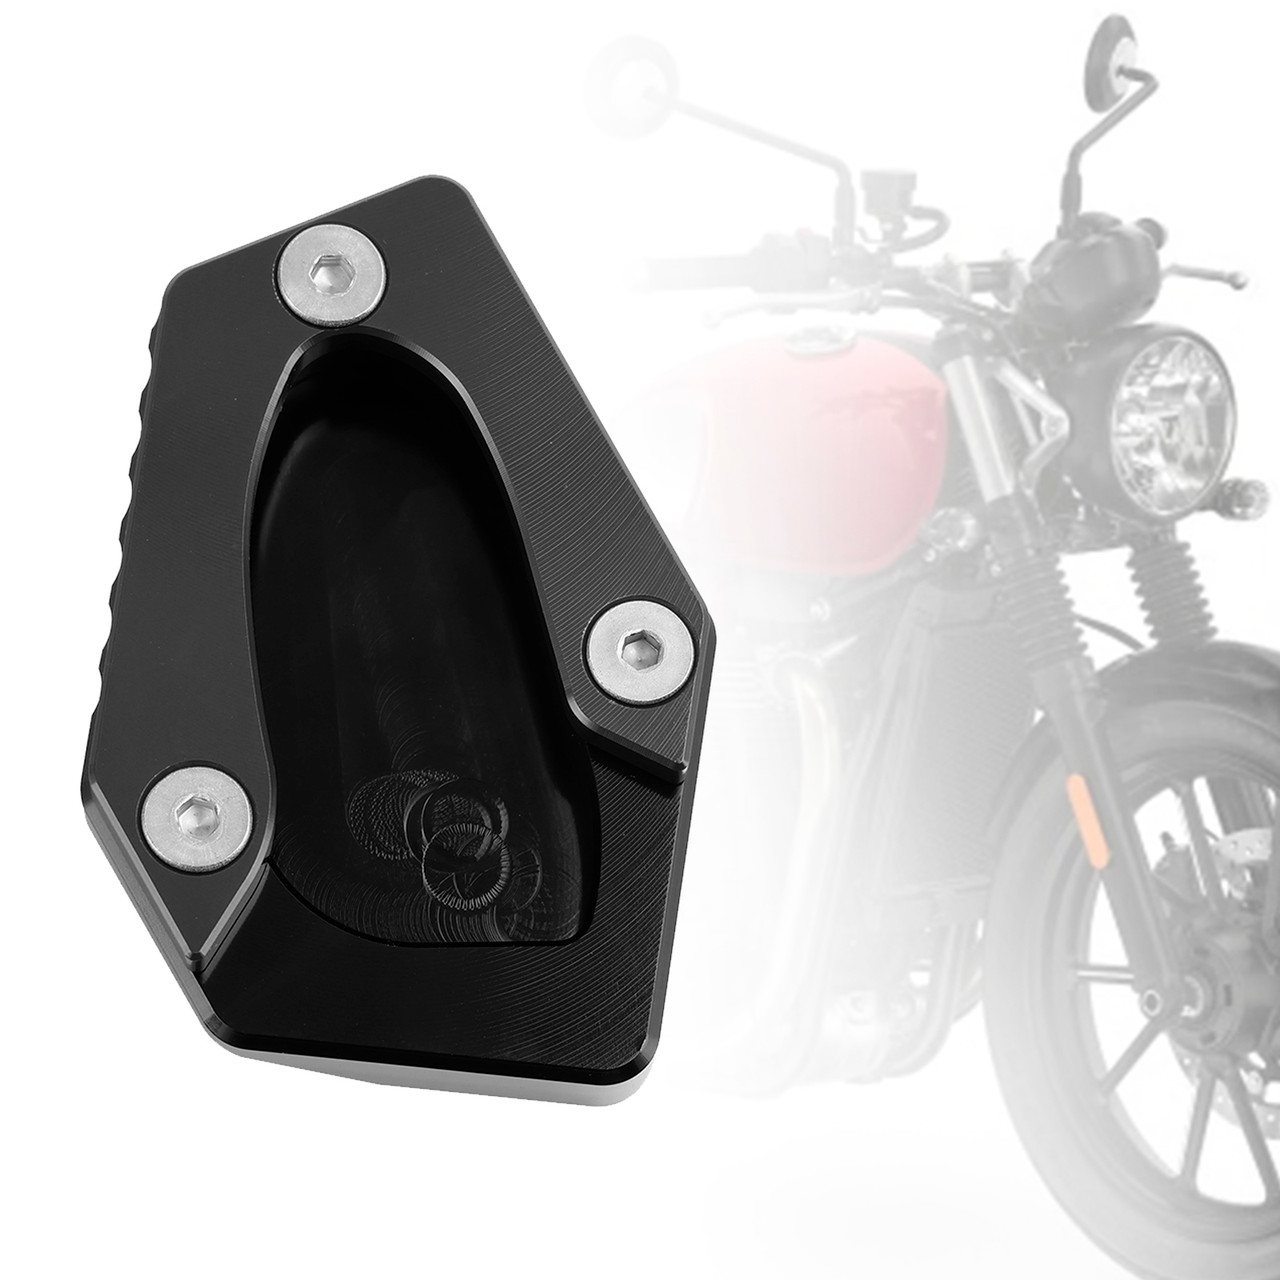 Kickstand Enlarge Plate Pad fit for Speed Twin 900 22-23 Street Cup 900 17-18 BLK